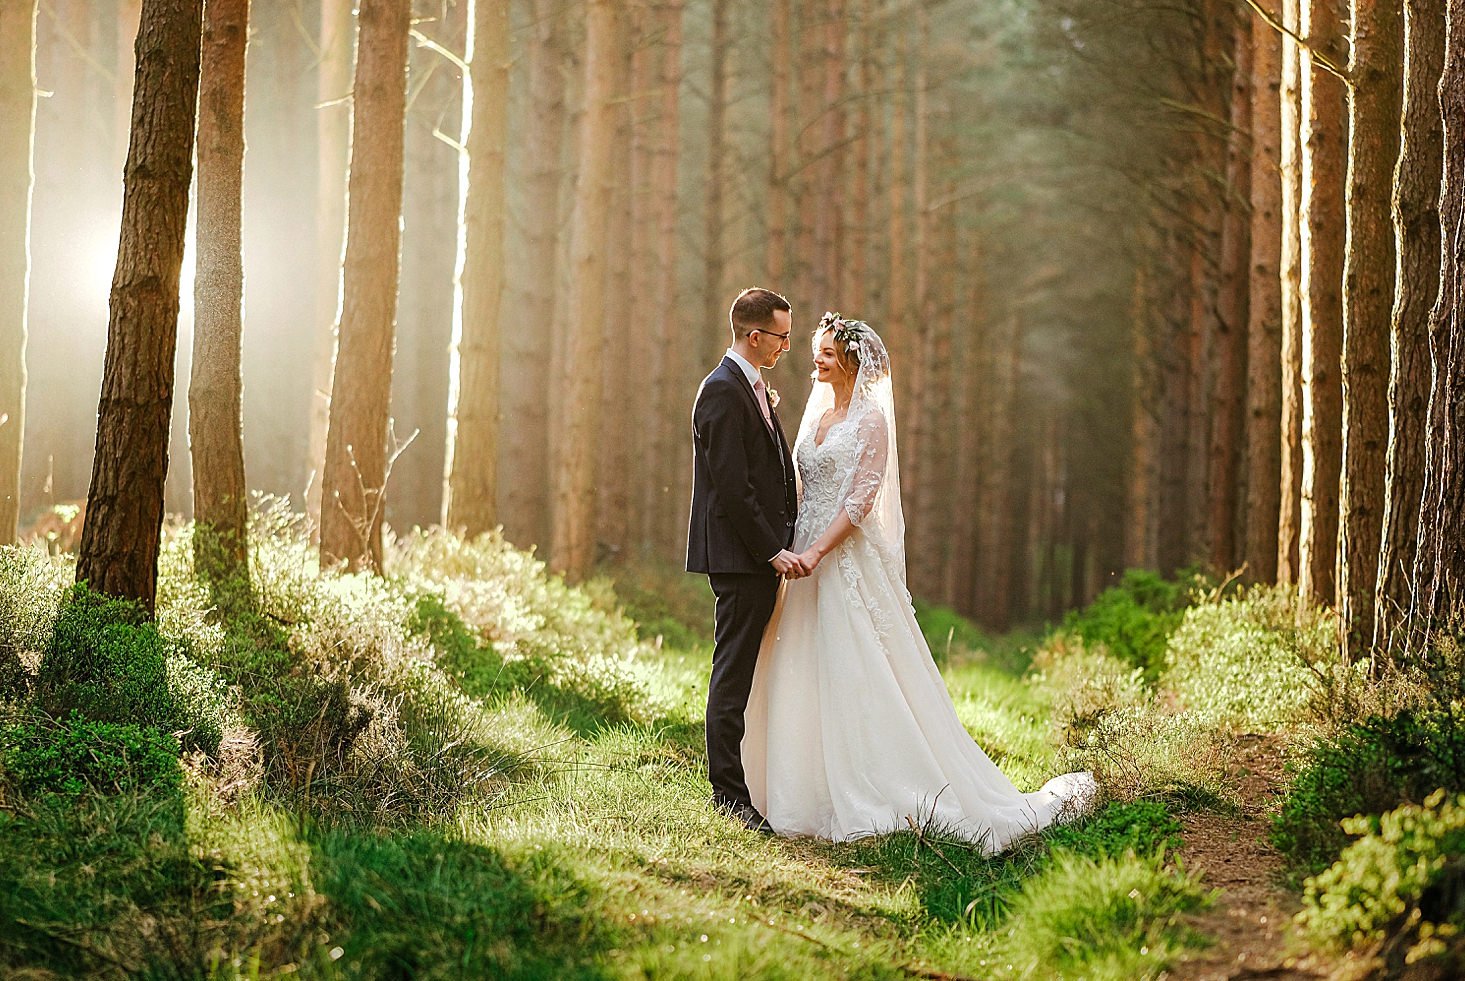 Mark and Louise come together under the trees of Healey Barn as the sun shines on them.

@healeybarn 

#wedding #weddings #weddingday #photo #photography #photographer #weddingphotography #weddingphotographer #northeastphotography #northeastwedding #